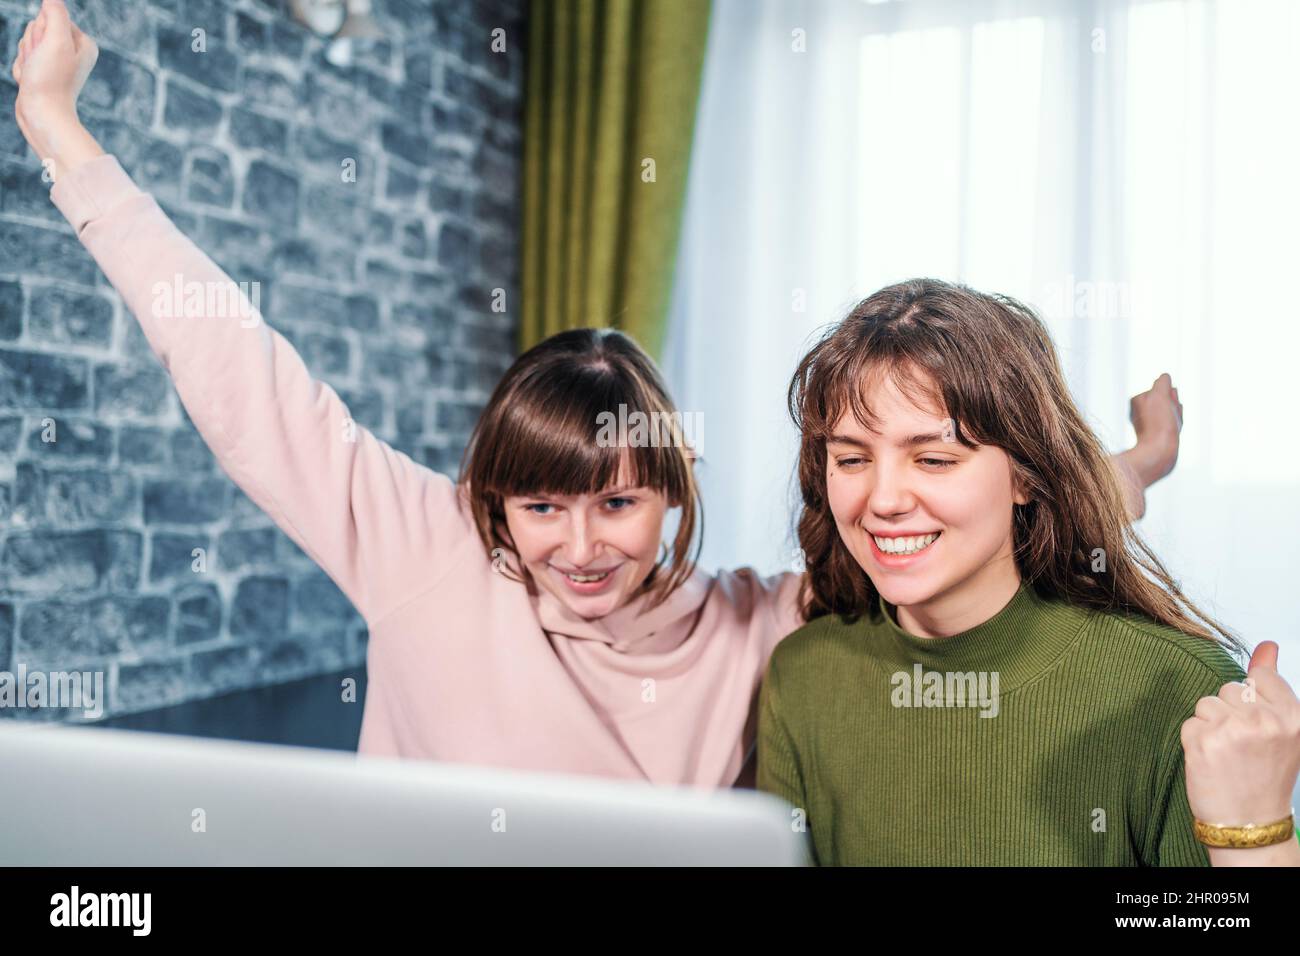 Young caucasian girls receive good news or winning lottery looking at laptop. Happy surprised girl gets positive emotion. Stock Photo